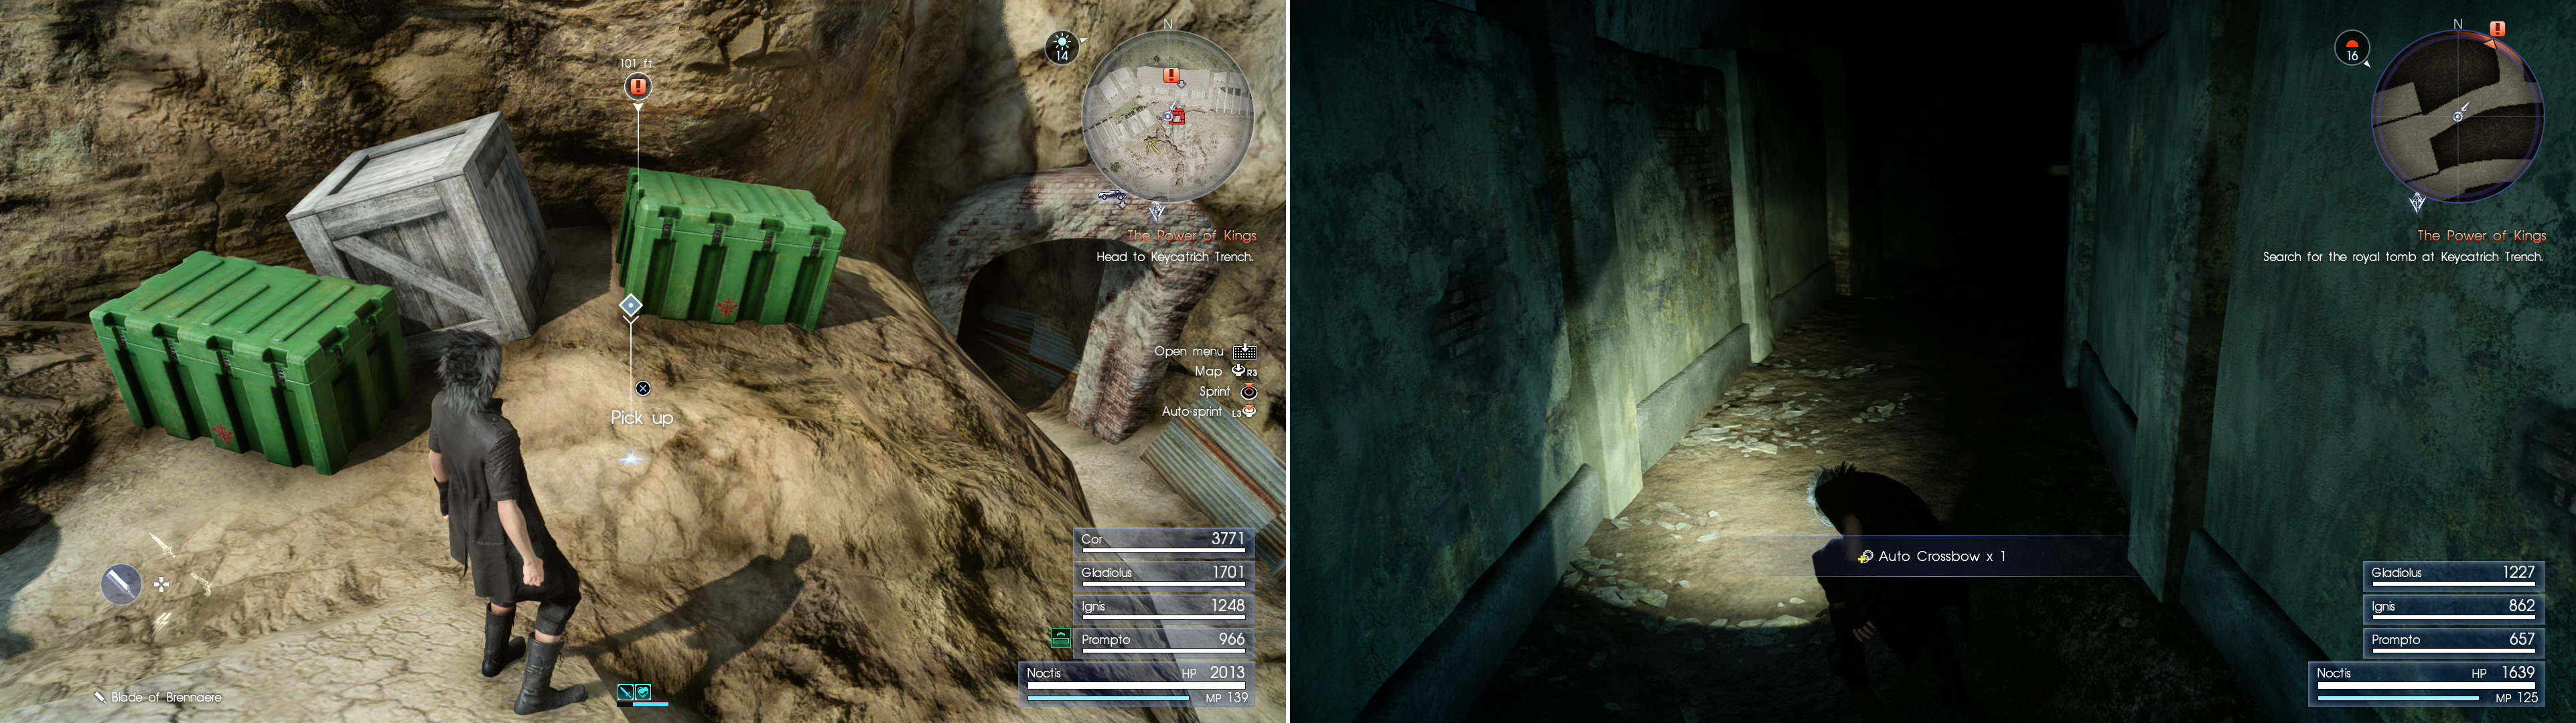 Grab the Bioblaster from outside the Keycatrich Trench dungeon (left). Inside the same dungeon you’ll find the Auto Crossbow (right).